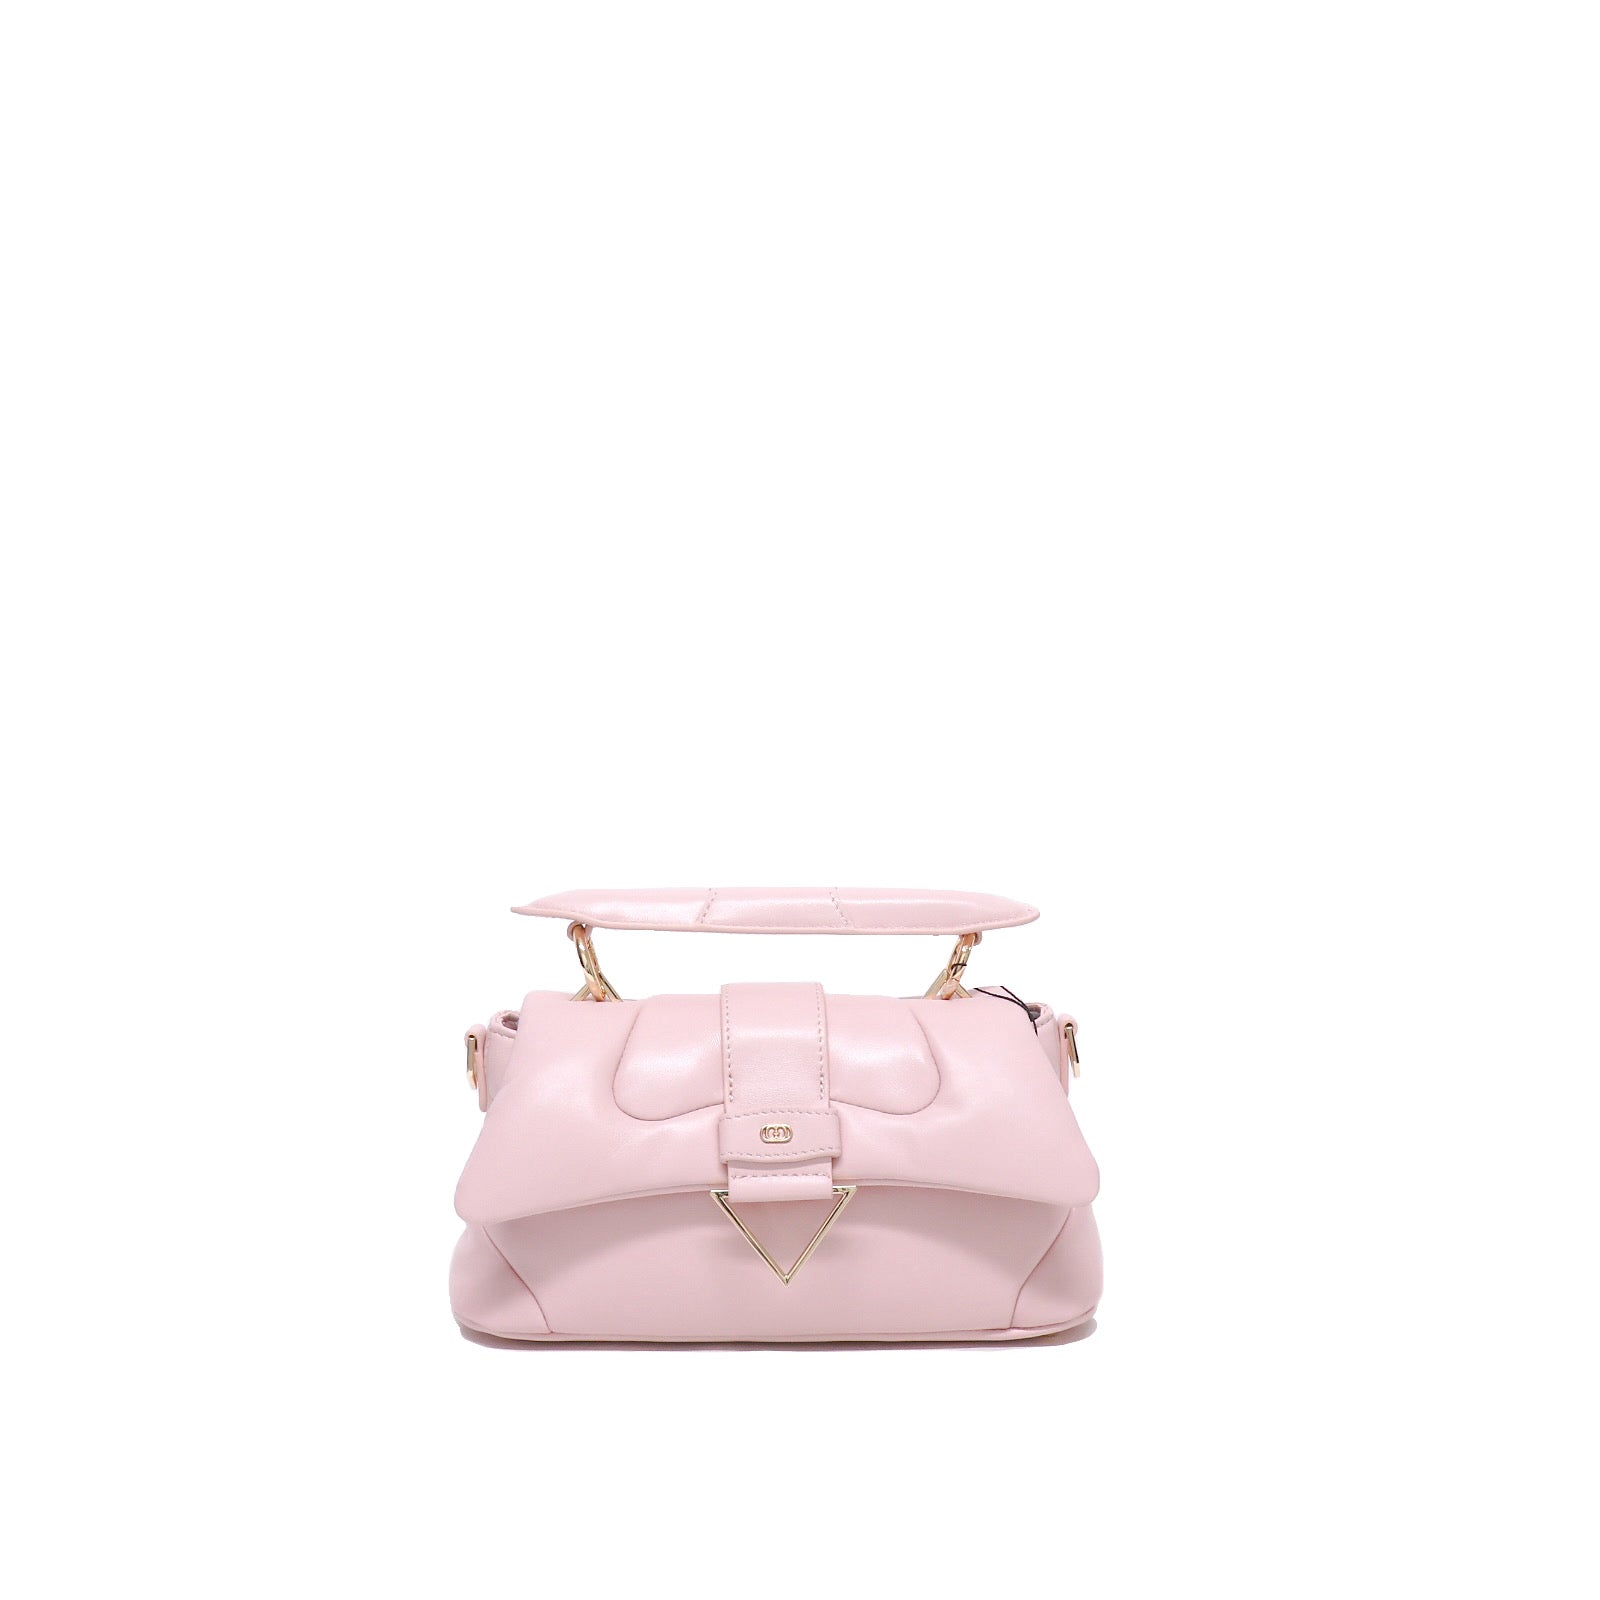 The Carrie Bag Pink Bag